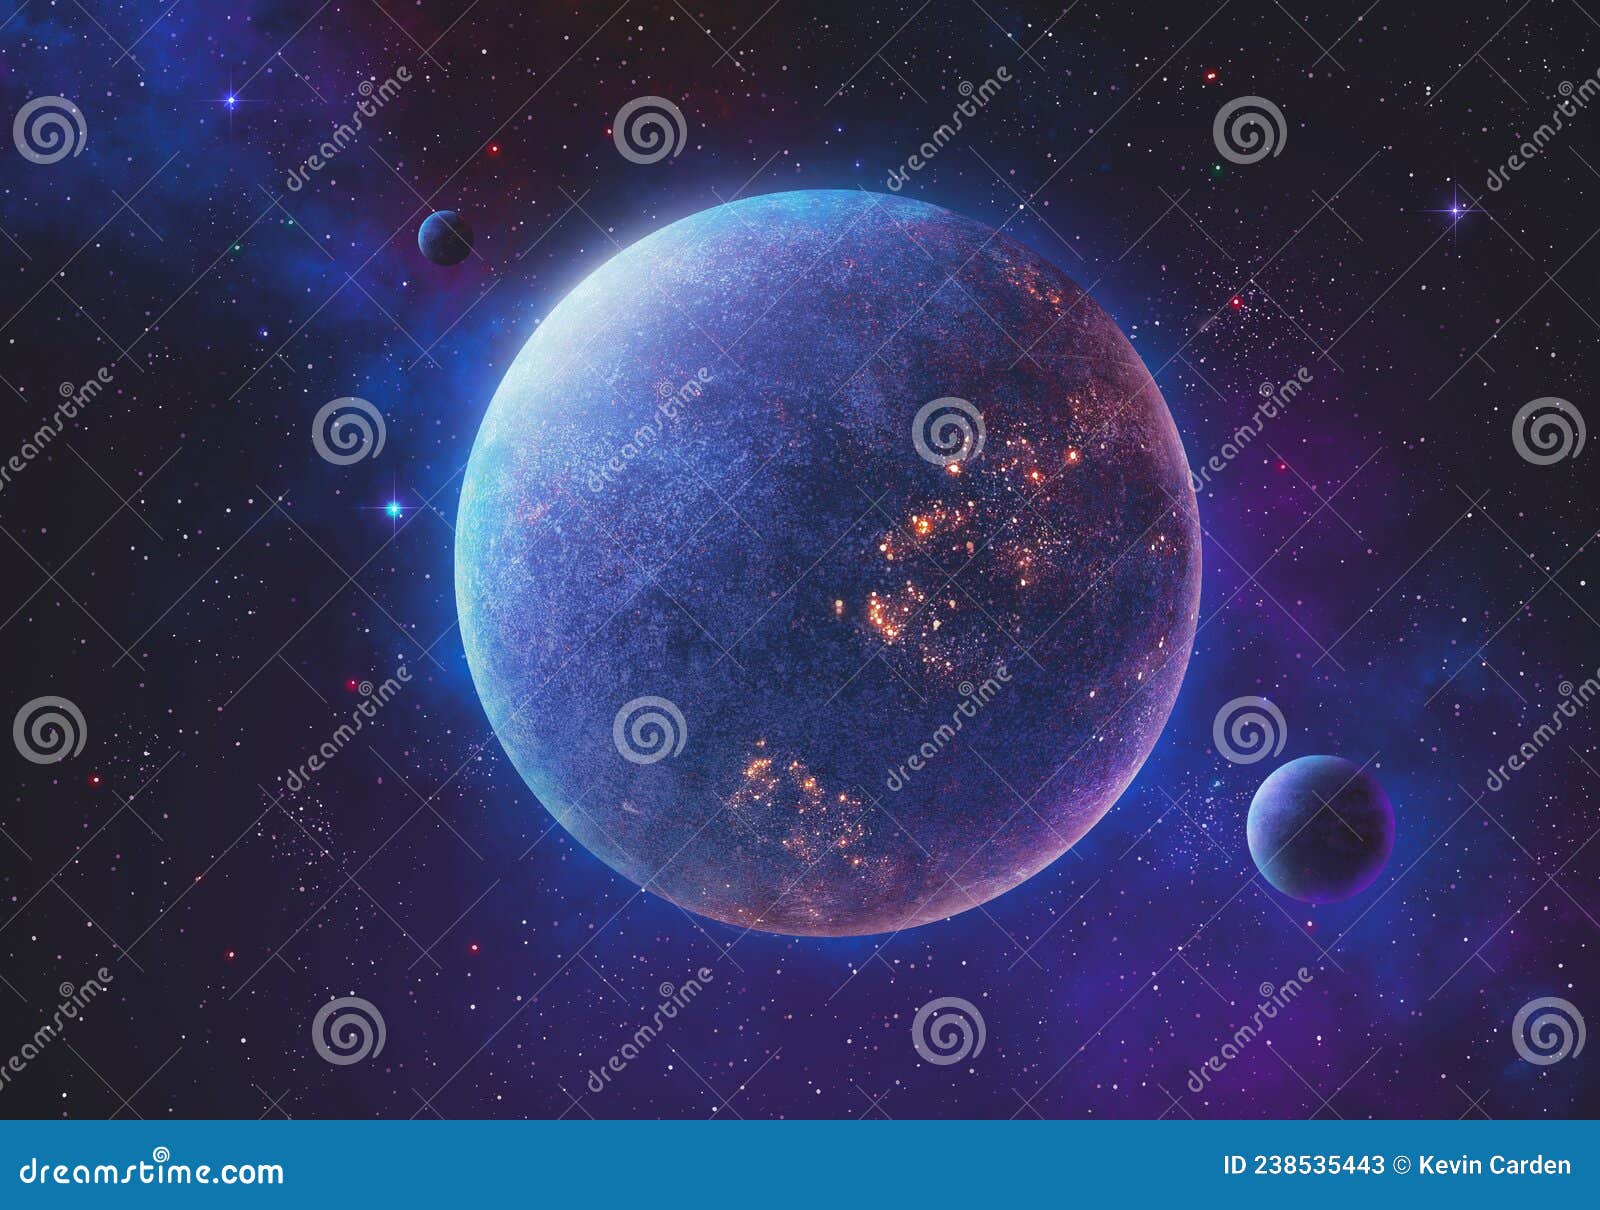 purple and blue planet